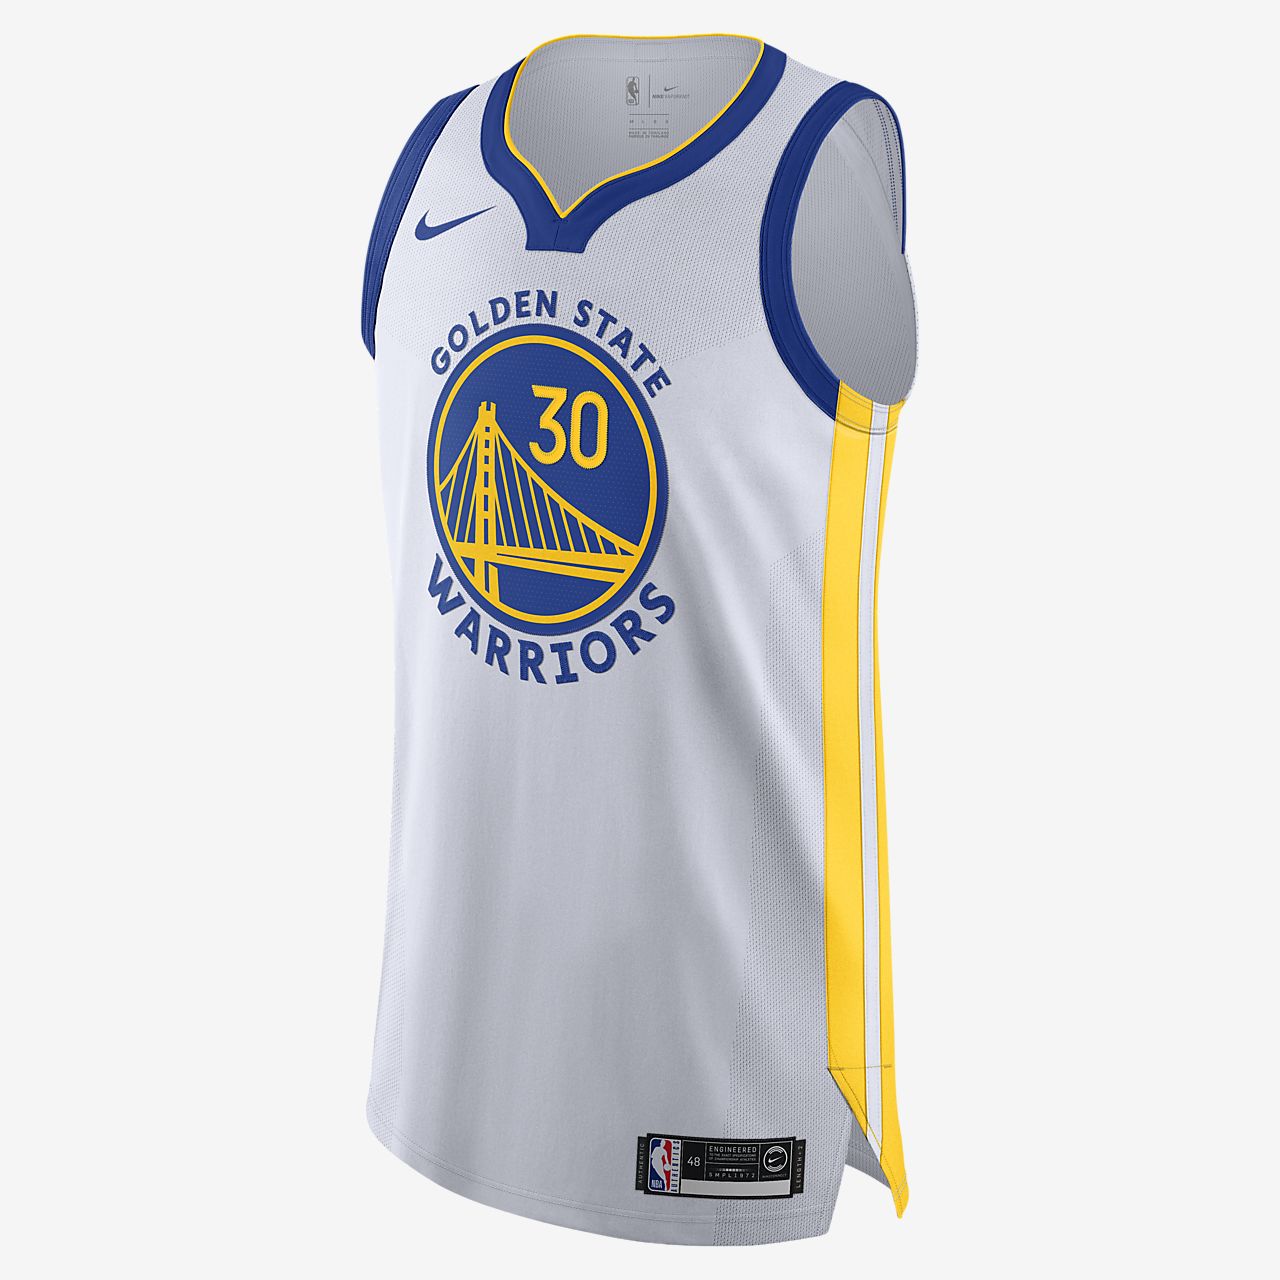 curry official jersey